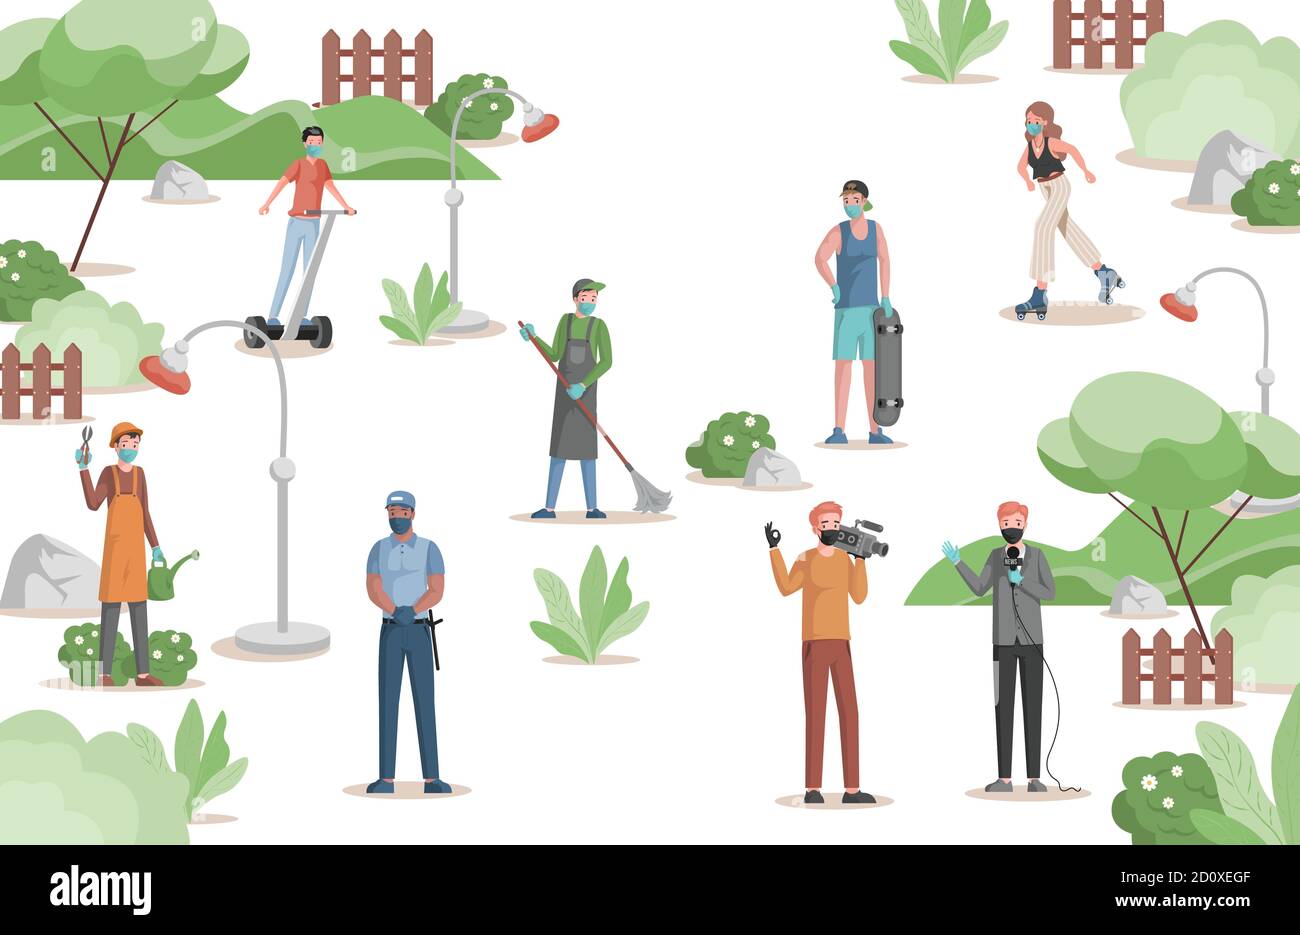 People of different professions doing their work in city park vector flat illustration. Gardener, police officer, anchorman and cameraman, janitor, skater, and roller skater in urban park. Stock Vector